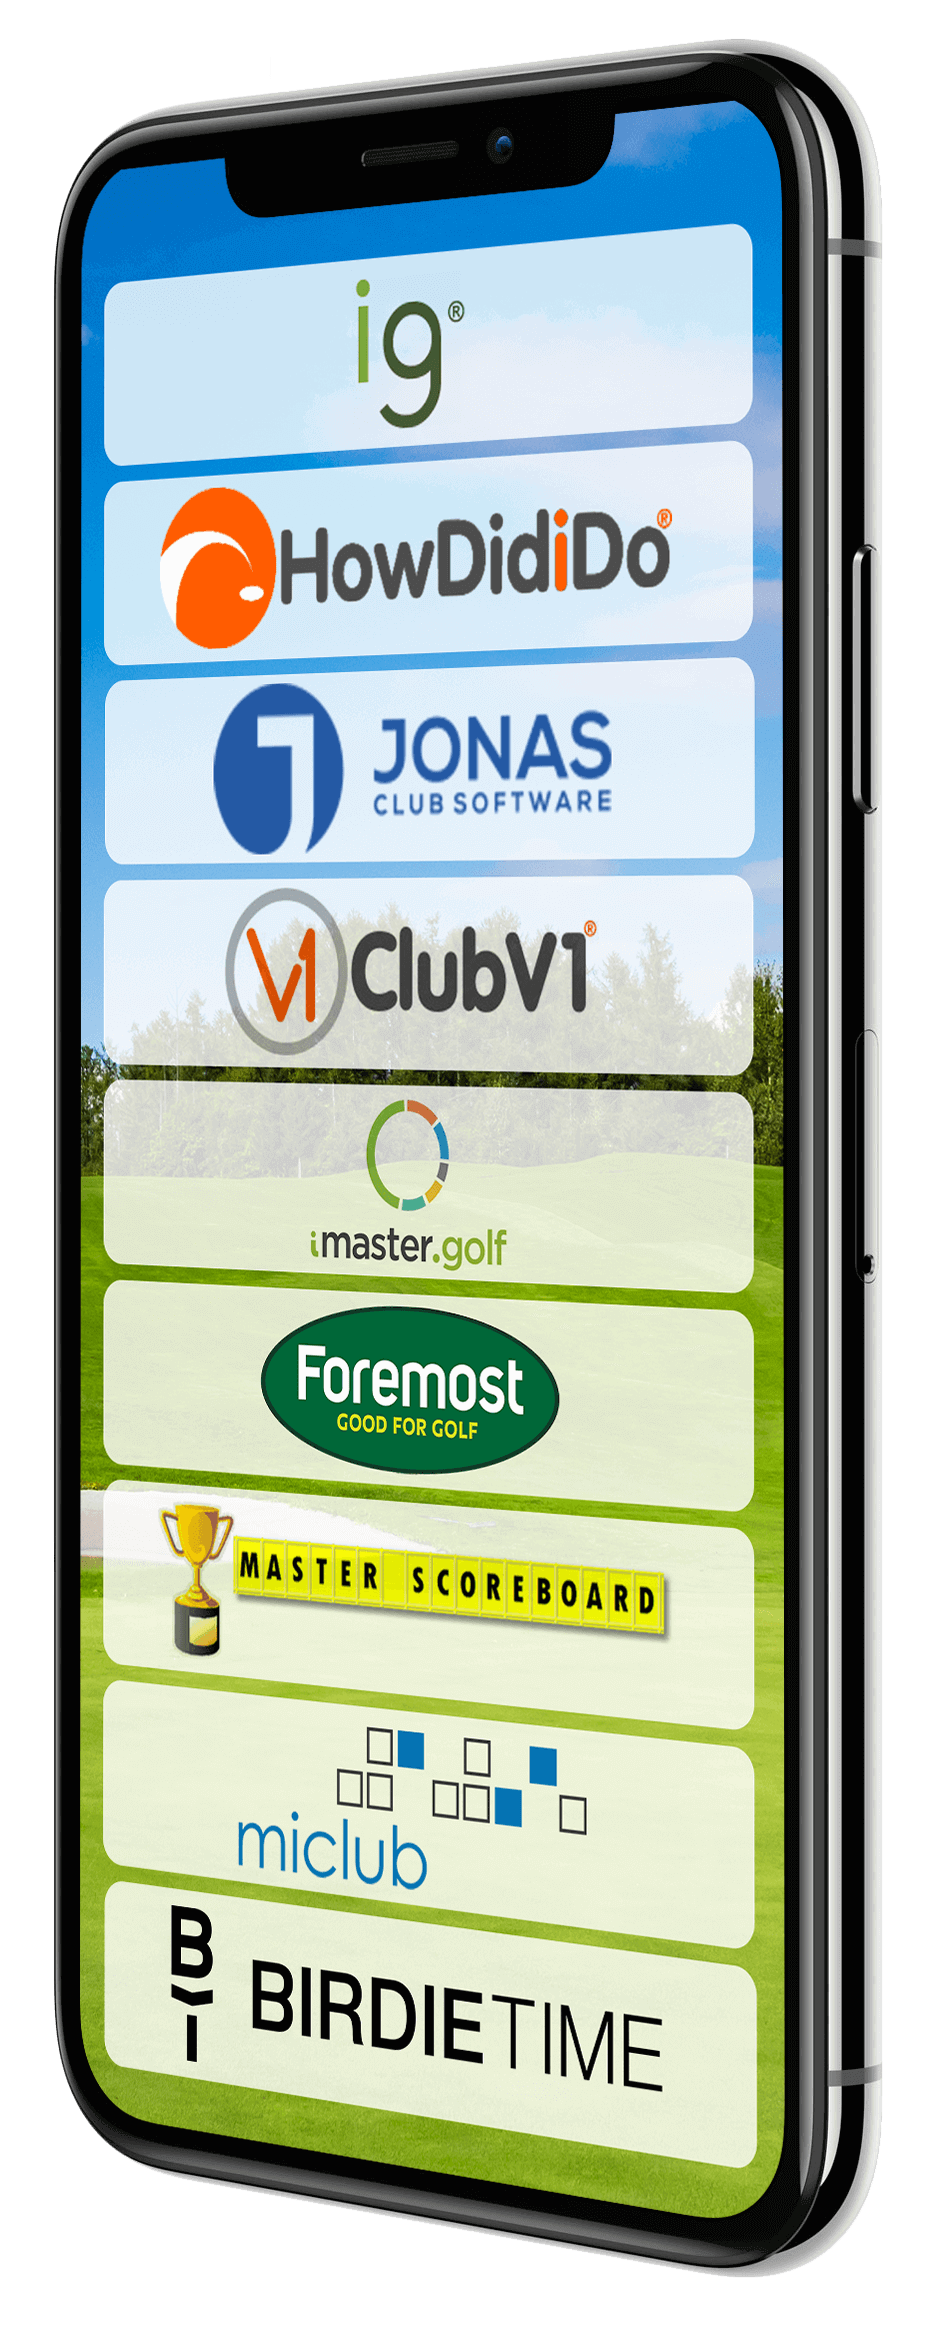 CourseMate is The Essential Golf Club App